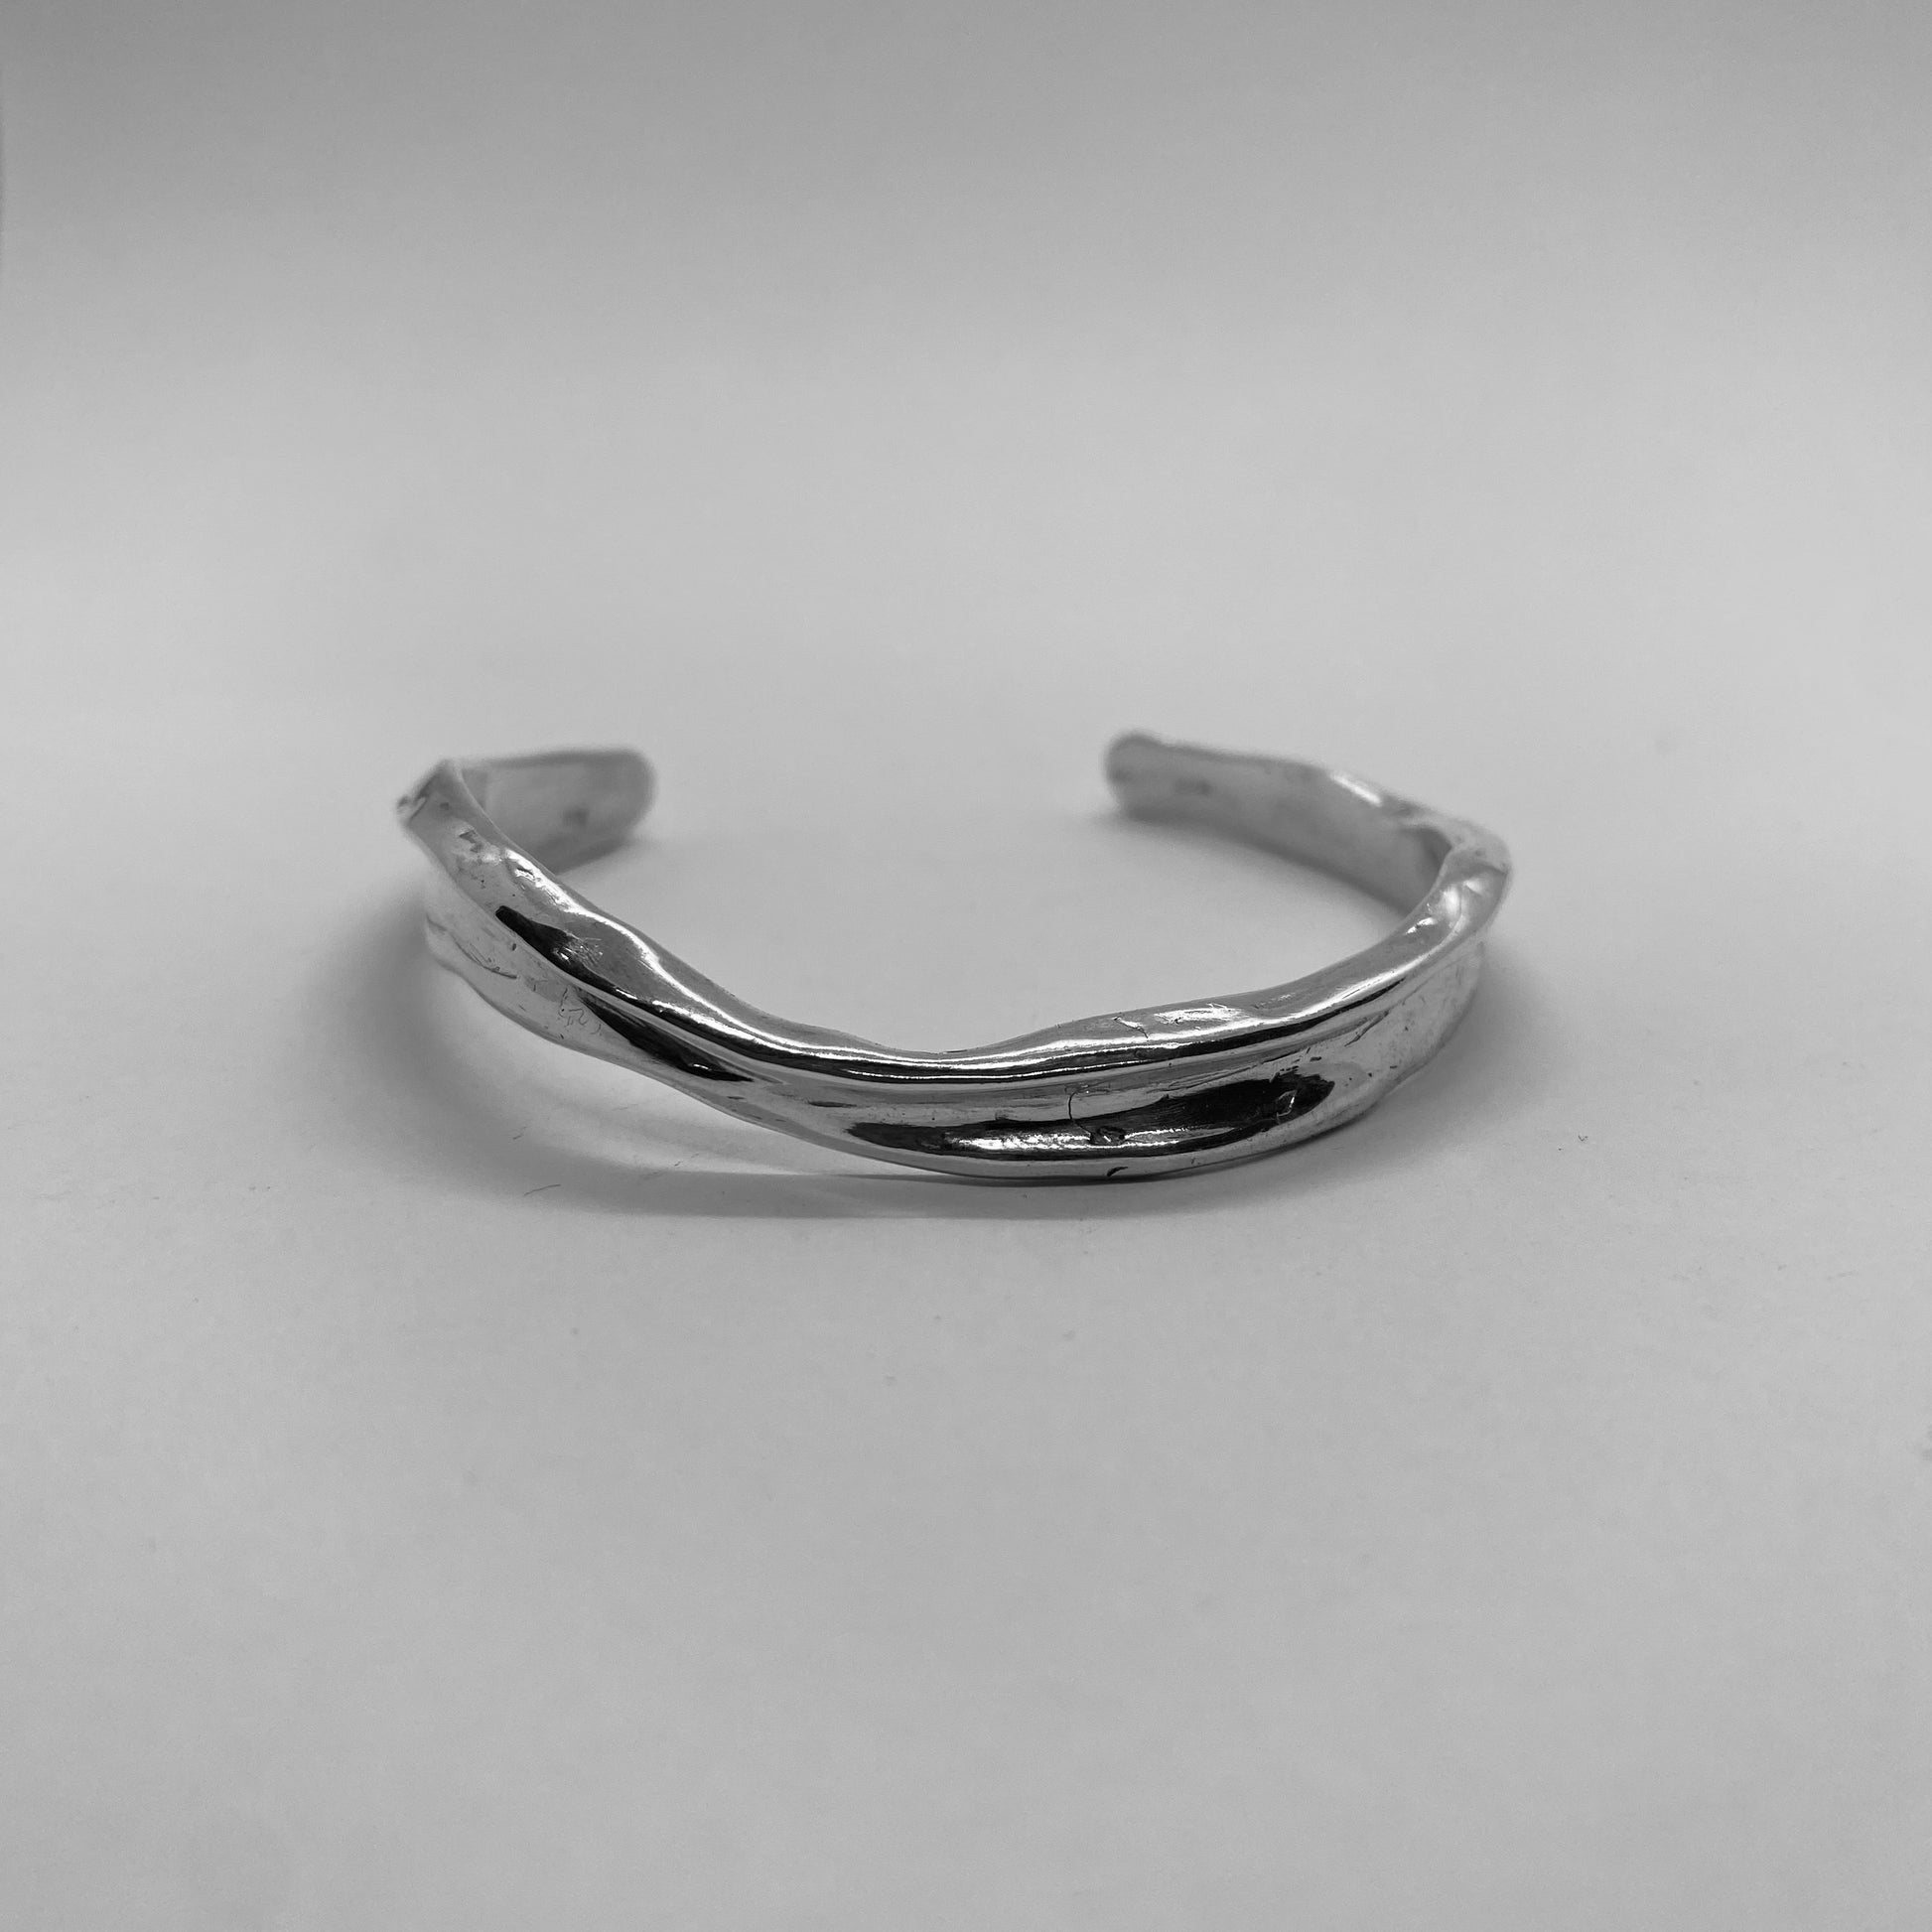 Handmade bracelet crafted from sterling silver 925